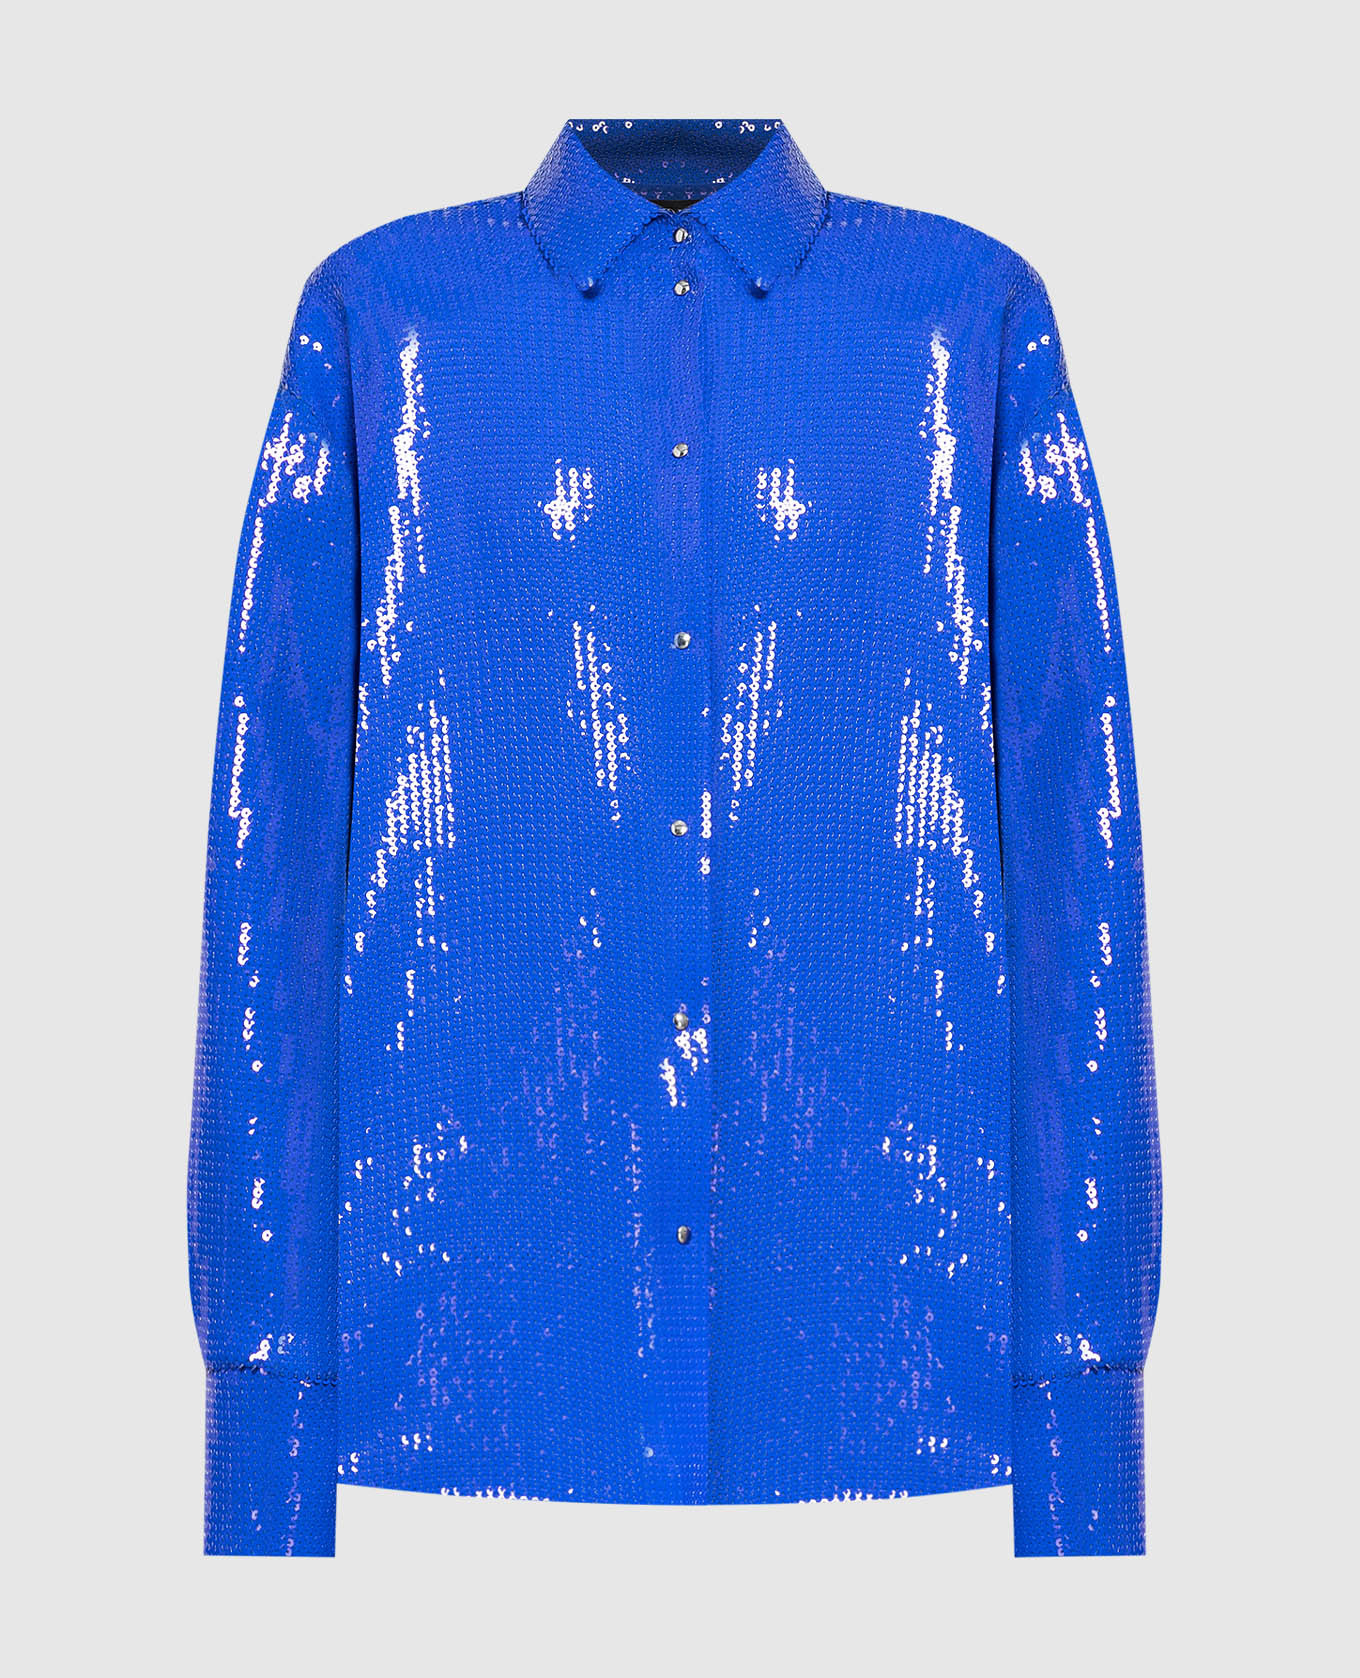 Blue shirt with sequins